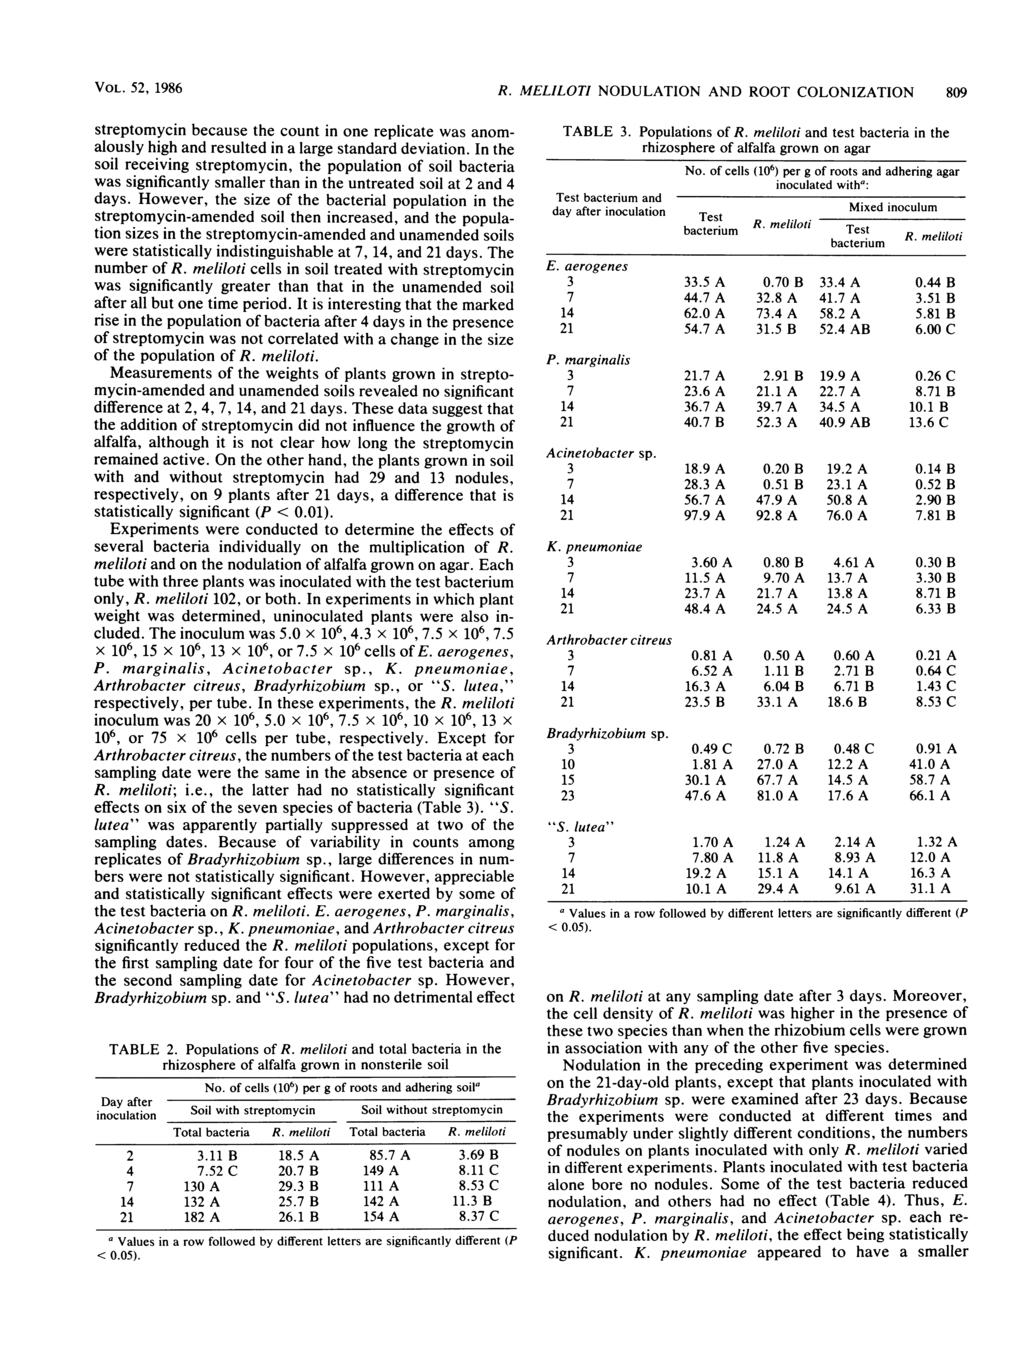 VOL. 52, 1986 R. MELILOTI NODULATION AND ROOT COLONIZATION 809 streptomycin because the count in one replicate was anomalously high and resulted in a large standard deviation.